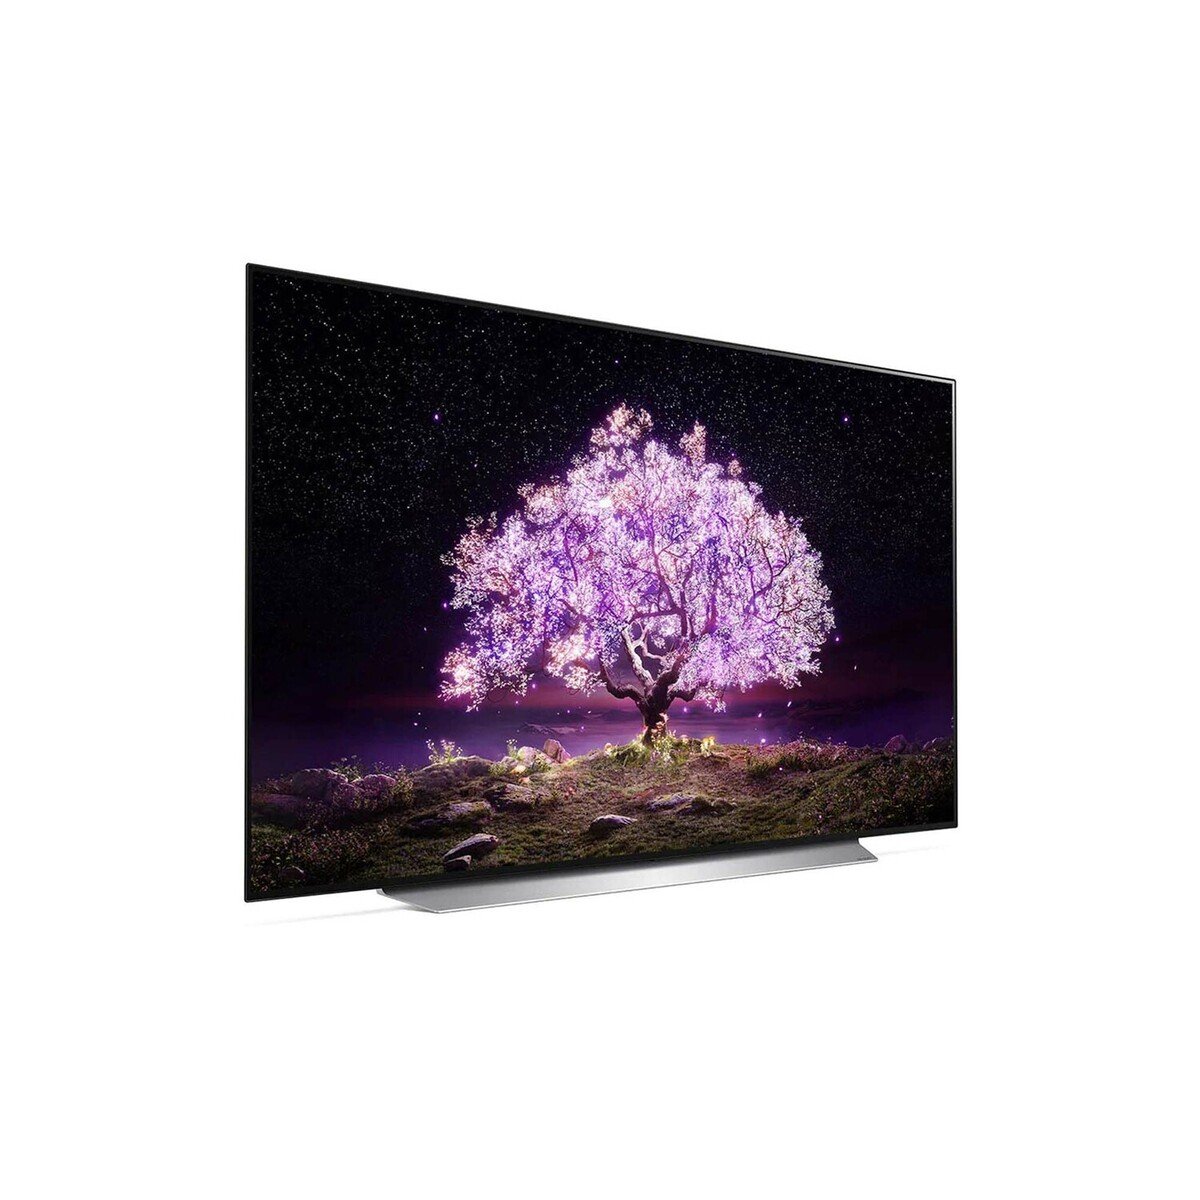 LG OLED TV 65 Inch C1 Series New 2021 Cinema Screen Design 4K Cinema HDR webOS Smart with ThinQ AI Pixel Dimming